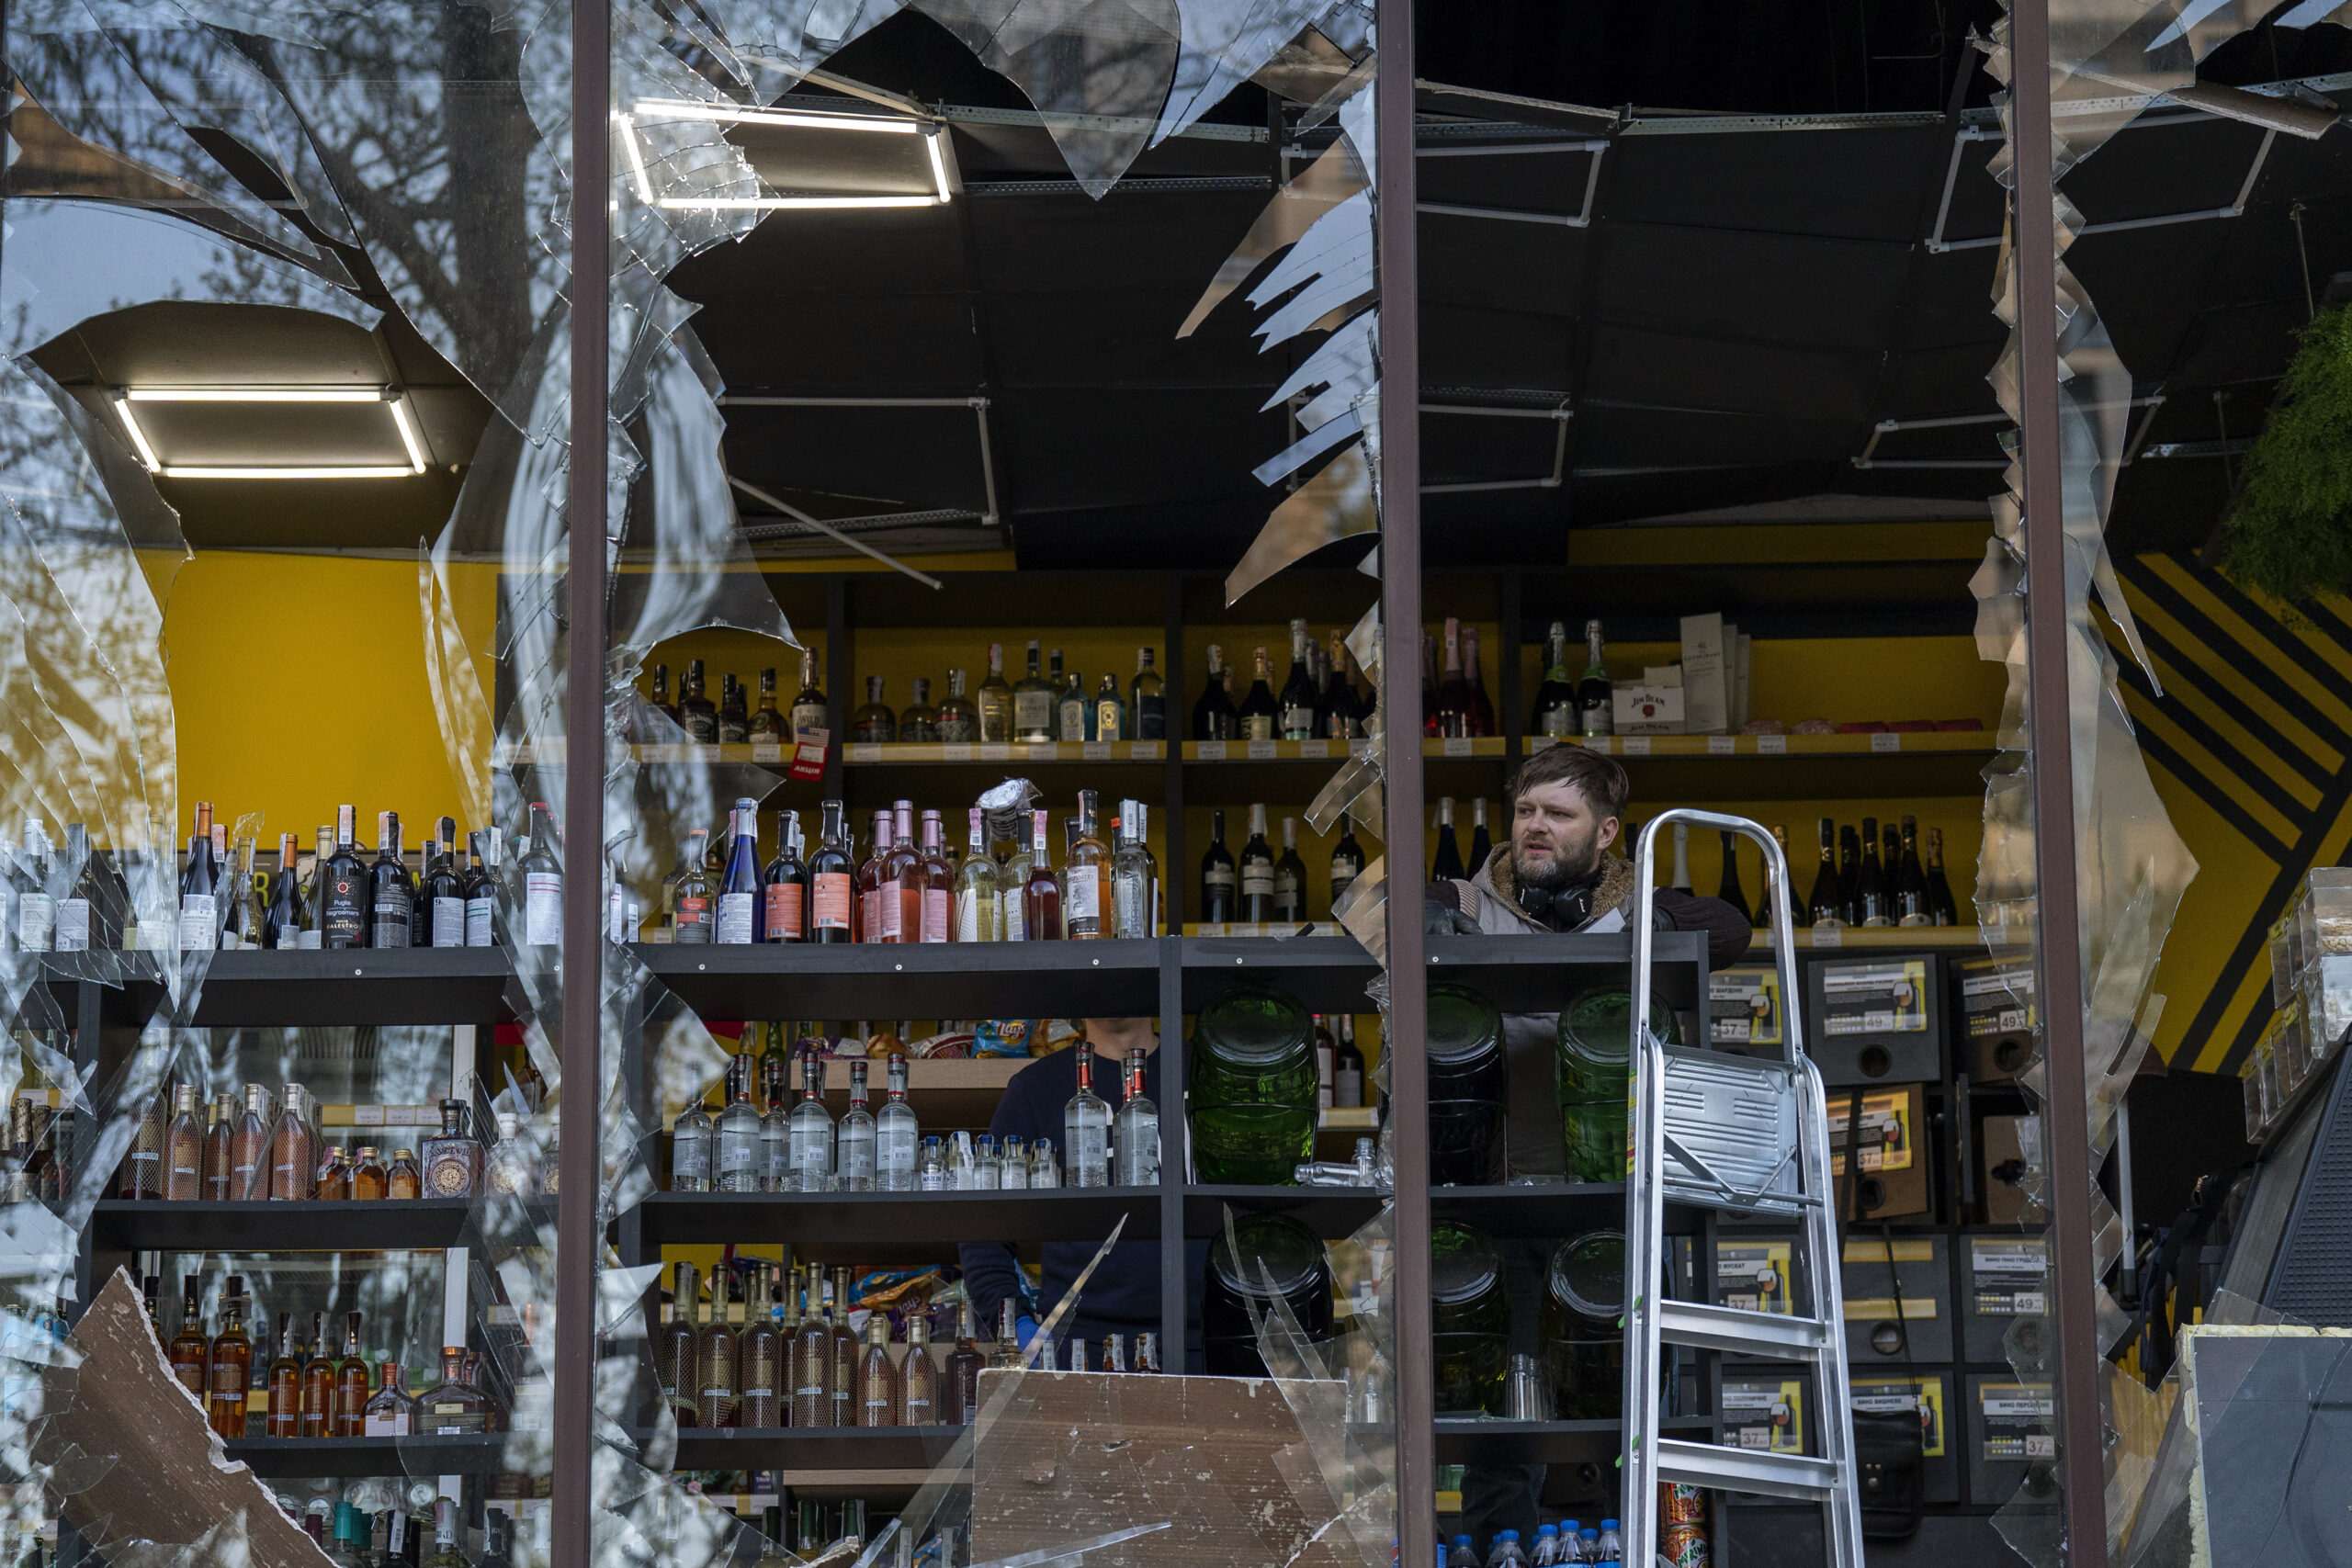 A liquor store owner looks at the damage to his shop caused by an explosion in Kyiv, Ukraine on Friday, April 29, 2022. Russia struck the Ukrainian capital of Kyiv shortly after a meeting between President Volodymyr Zelenskyy and U.N. Secretary-General António Guterres on Thursday evening. (AP Photo/Emilio Morenatti)